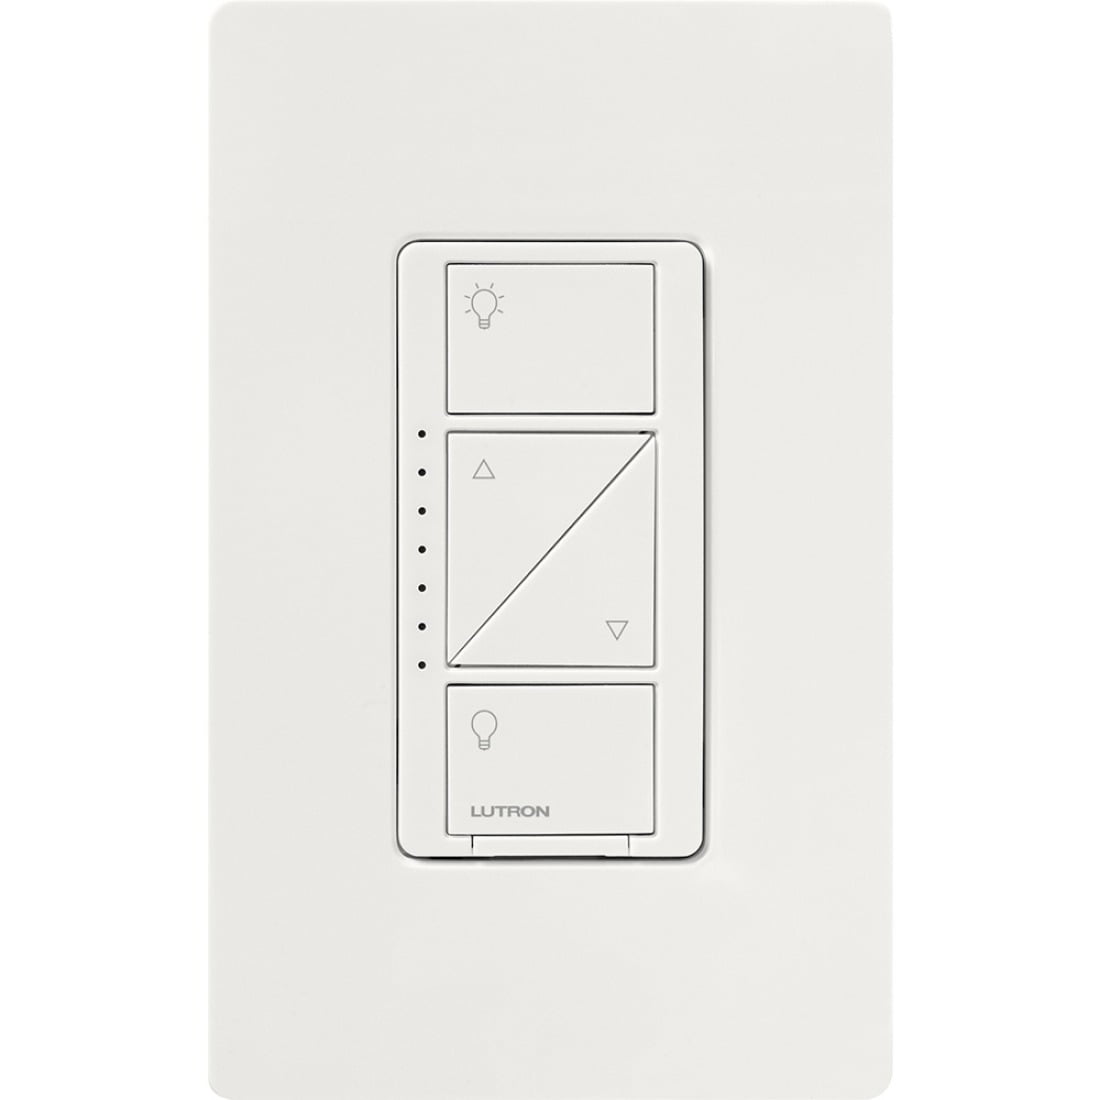 PD-6WCL-WH-C Works with Alexa White Lutron Caseta Wireless Smart Lighting Dimmer Switch for Wall /& Ceiling Lights